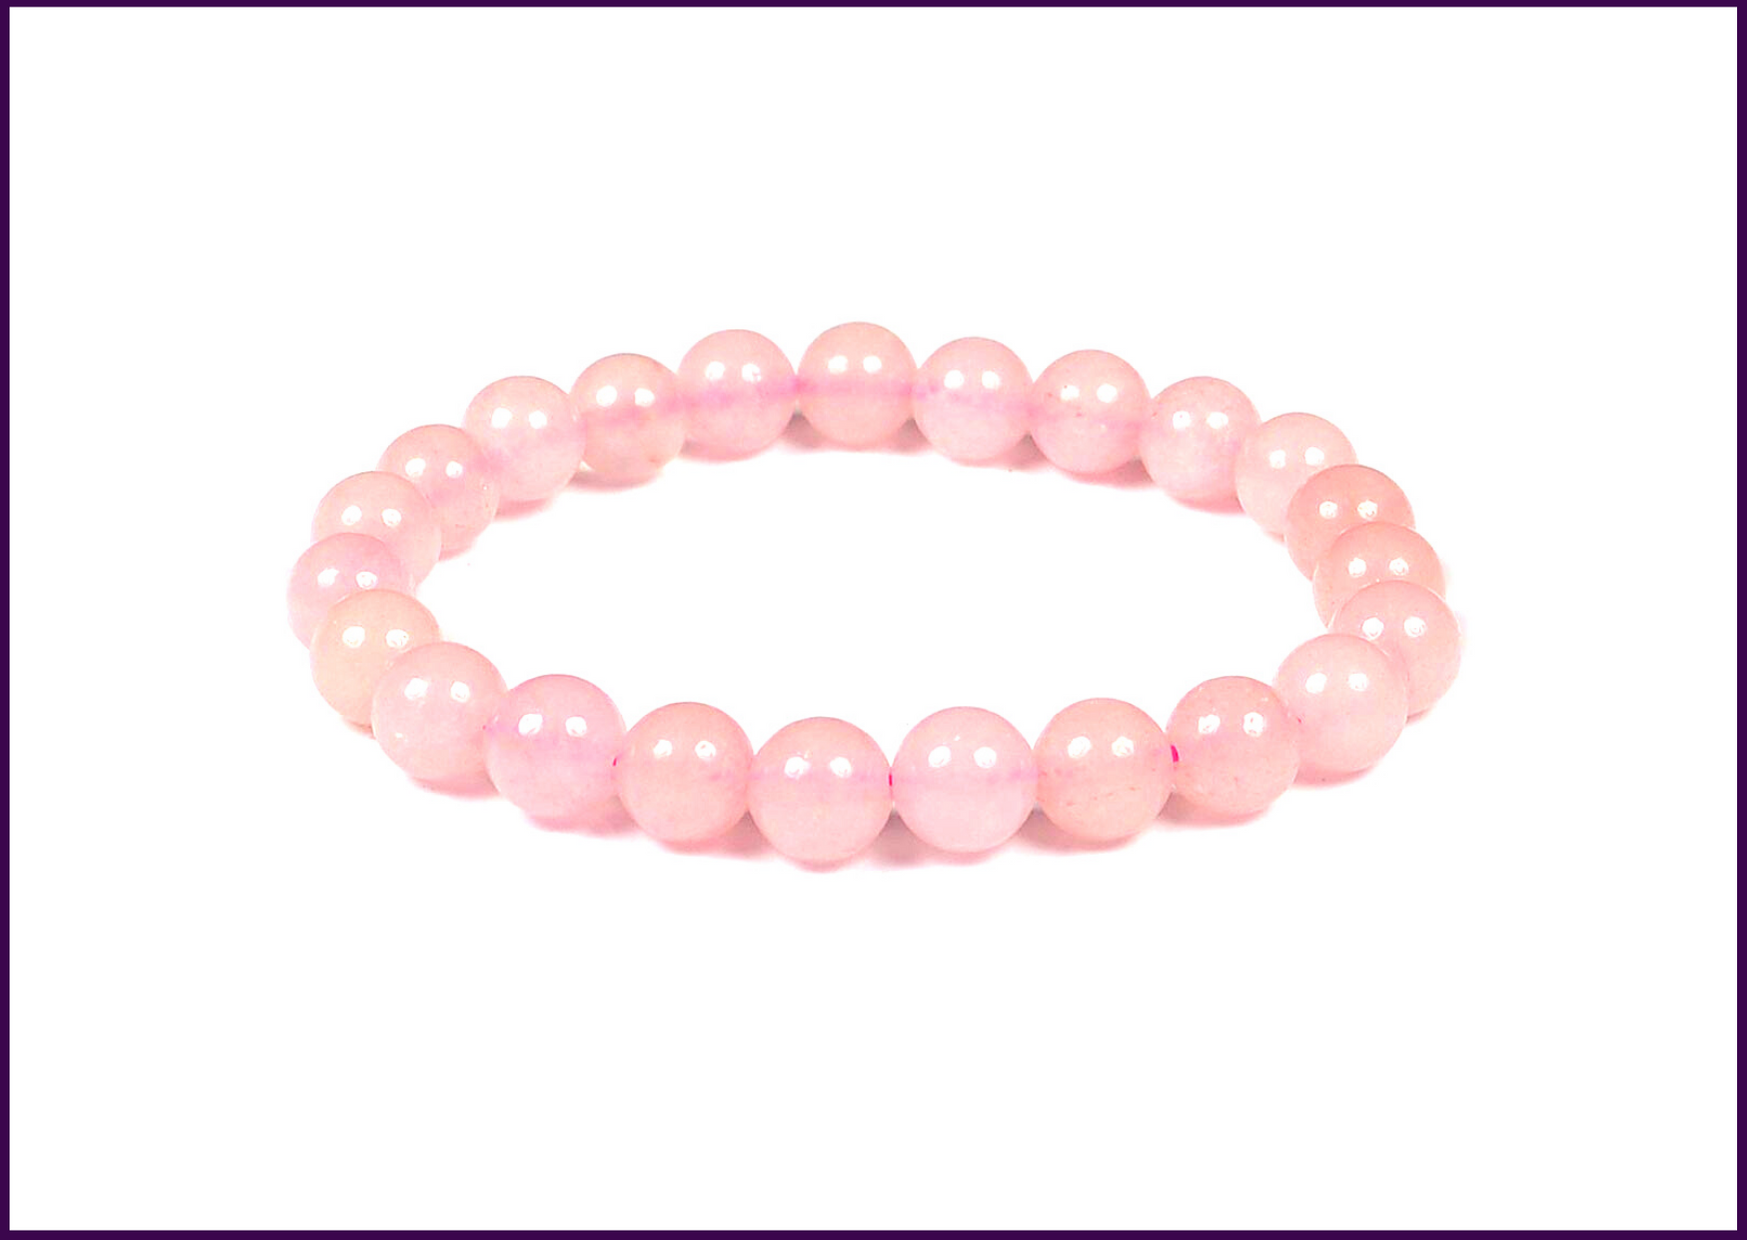 Rose Quartz Crystal Stone Bracelet to Attract Loving Energy To Relationships - 51pyramids